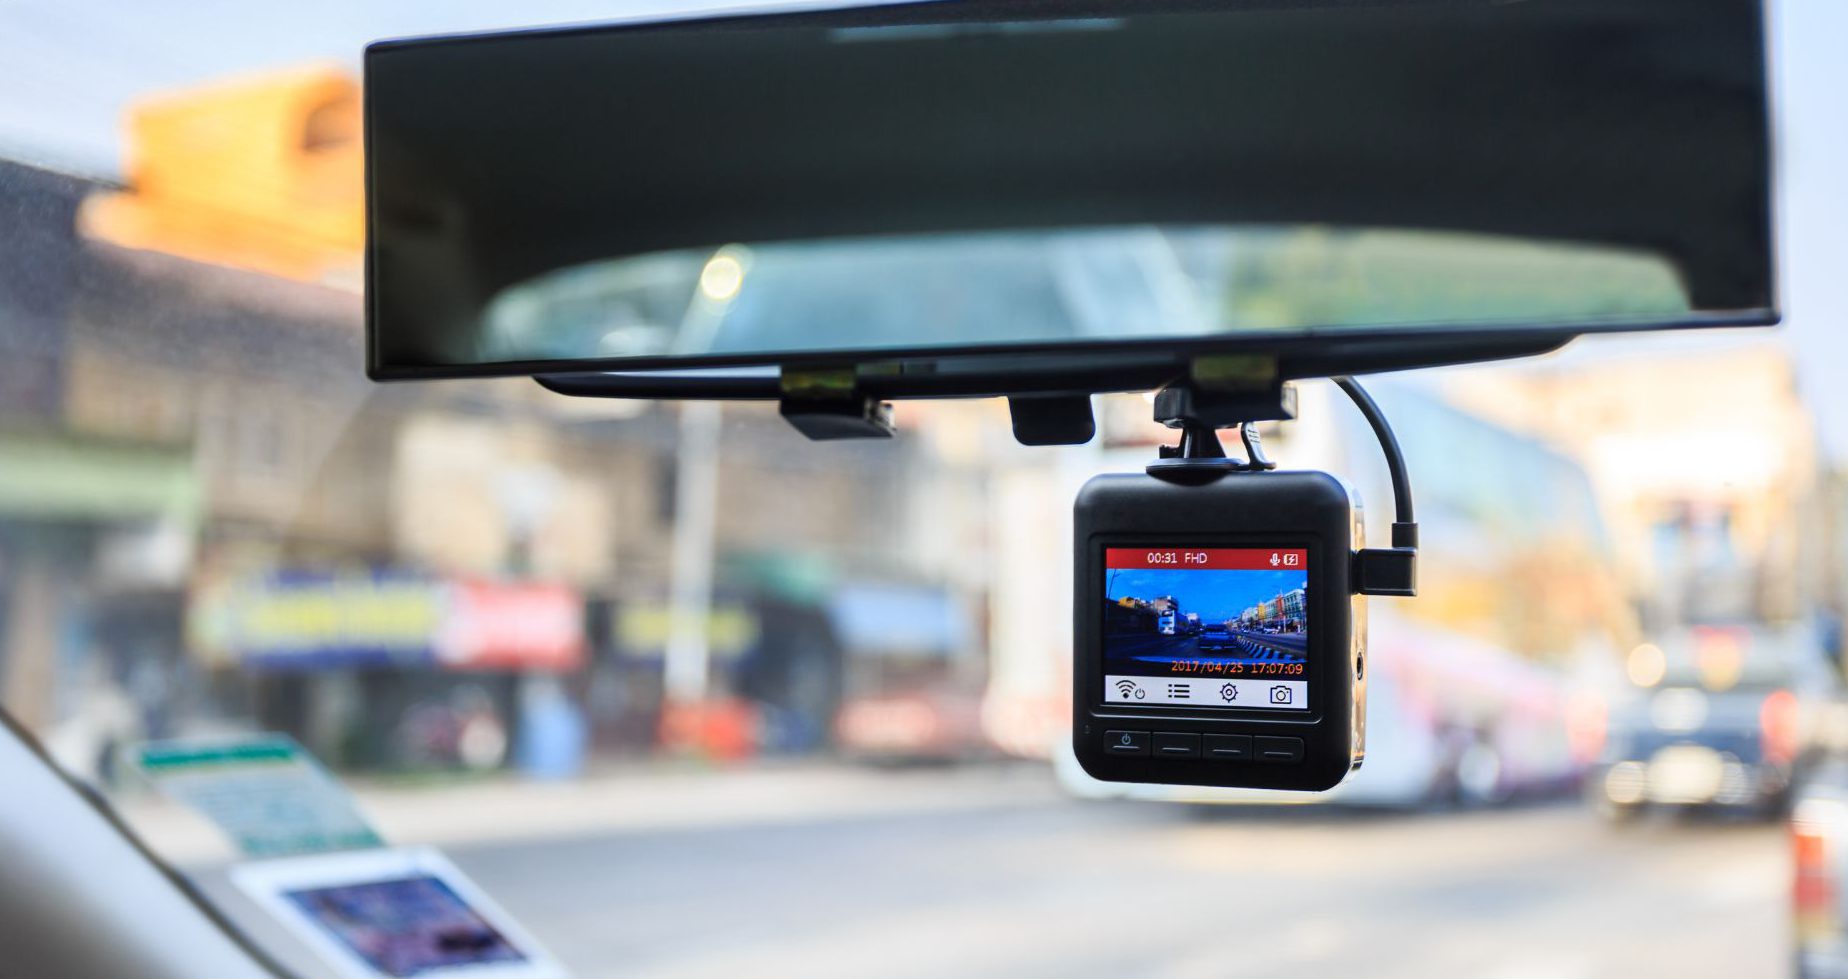 Global Automotive Camera Market Outlook, Opportunities And Strategies – Includes Automotive Camera Market Size